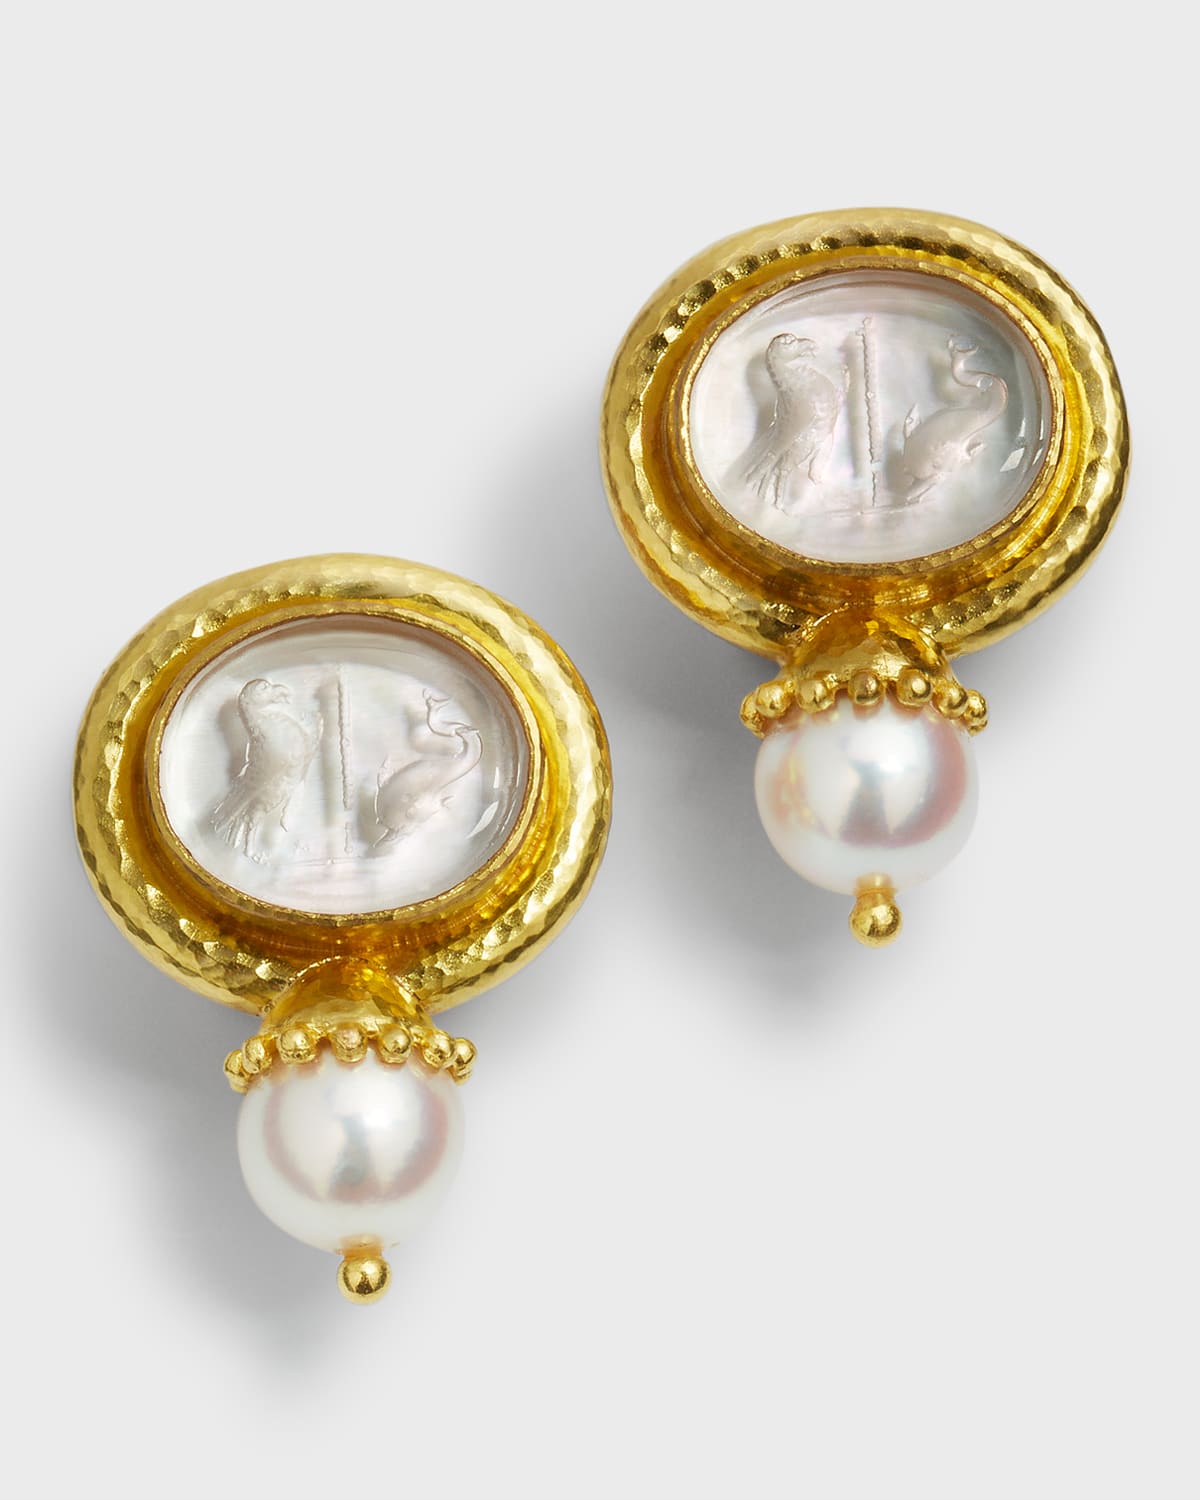 Eagle and Dolphin Earrings with Akoya Pearls